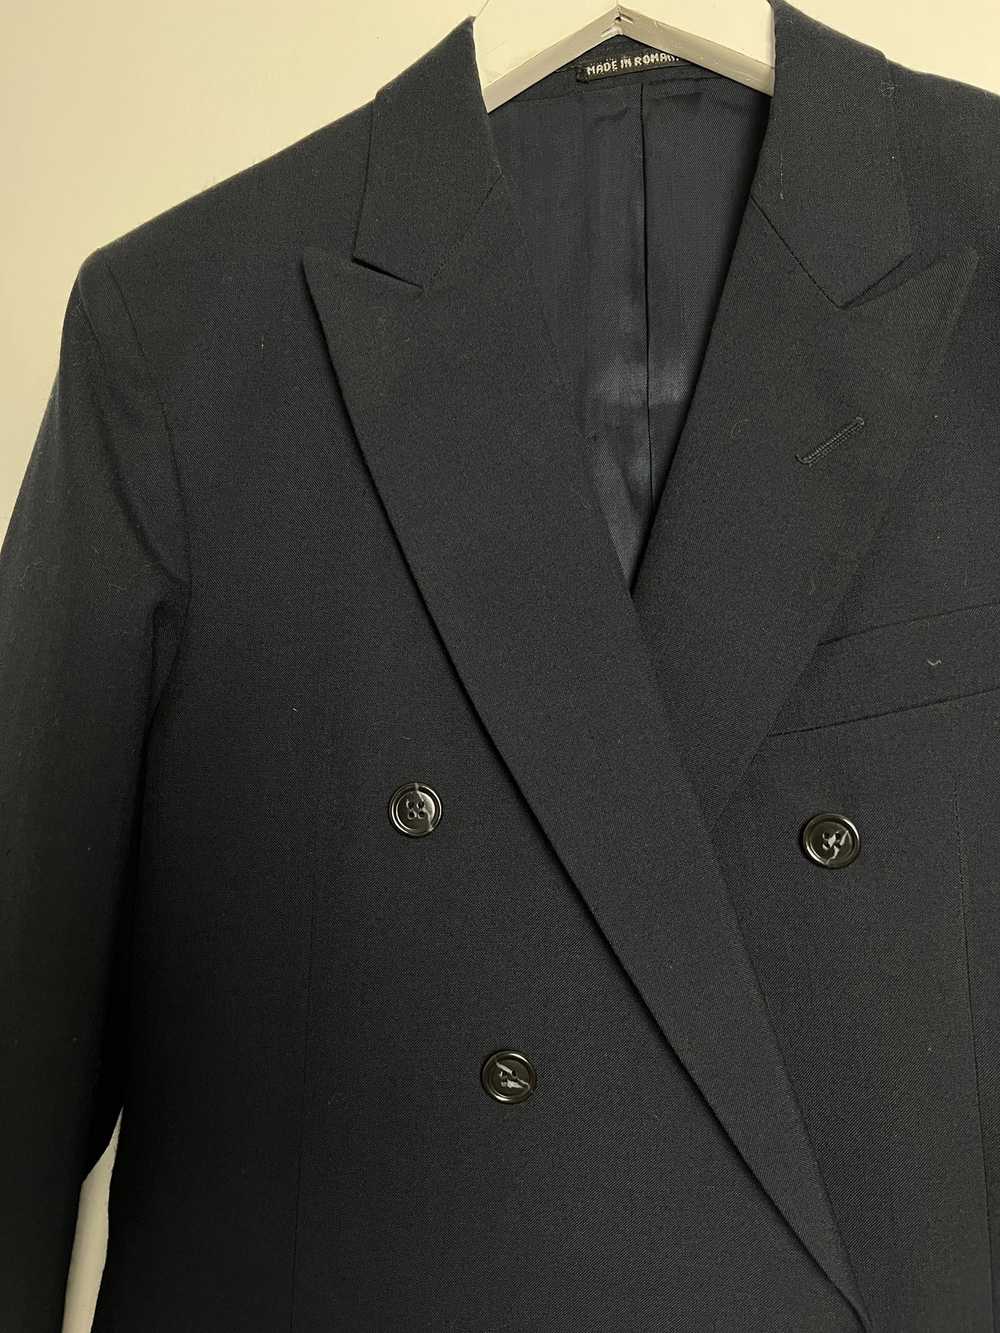 Vintage Navy Doubled Breasted Blazer - image 4